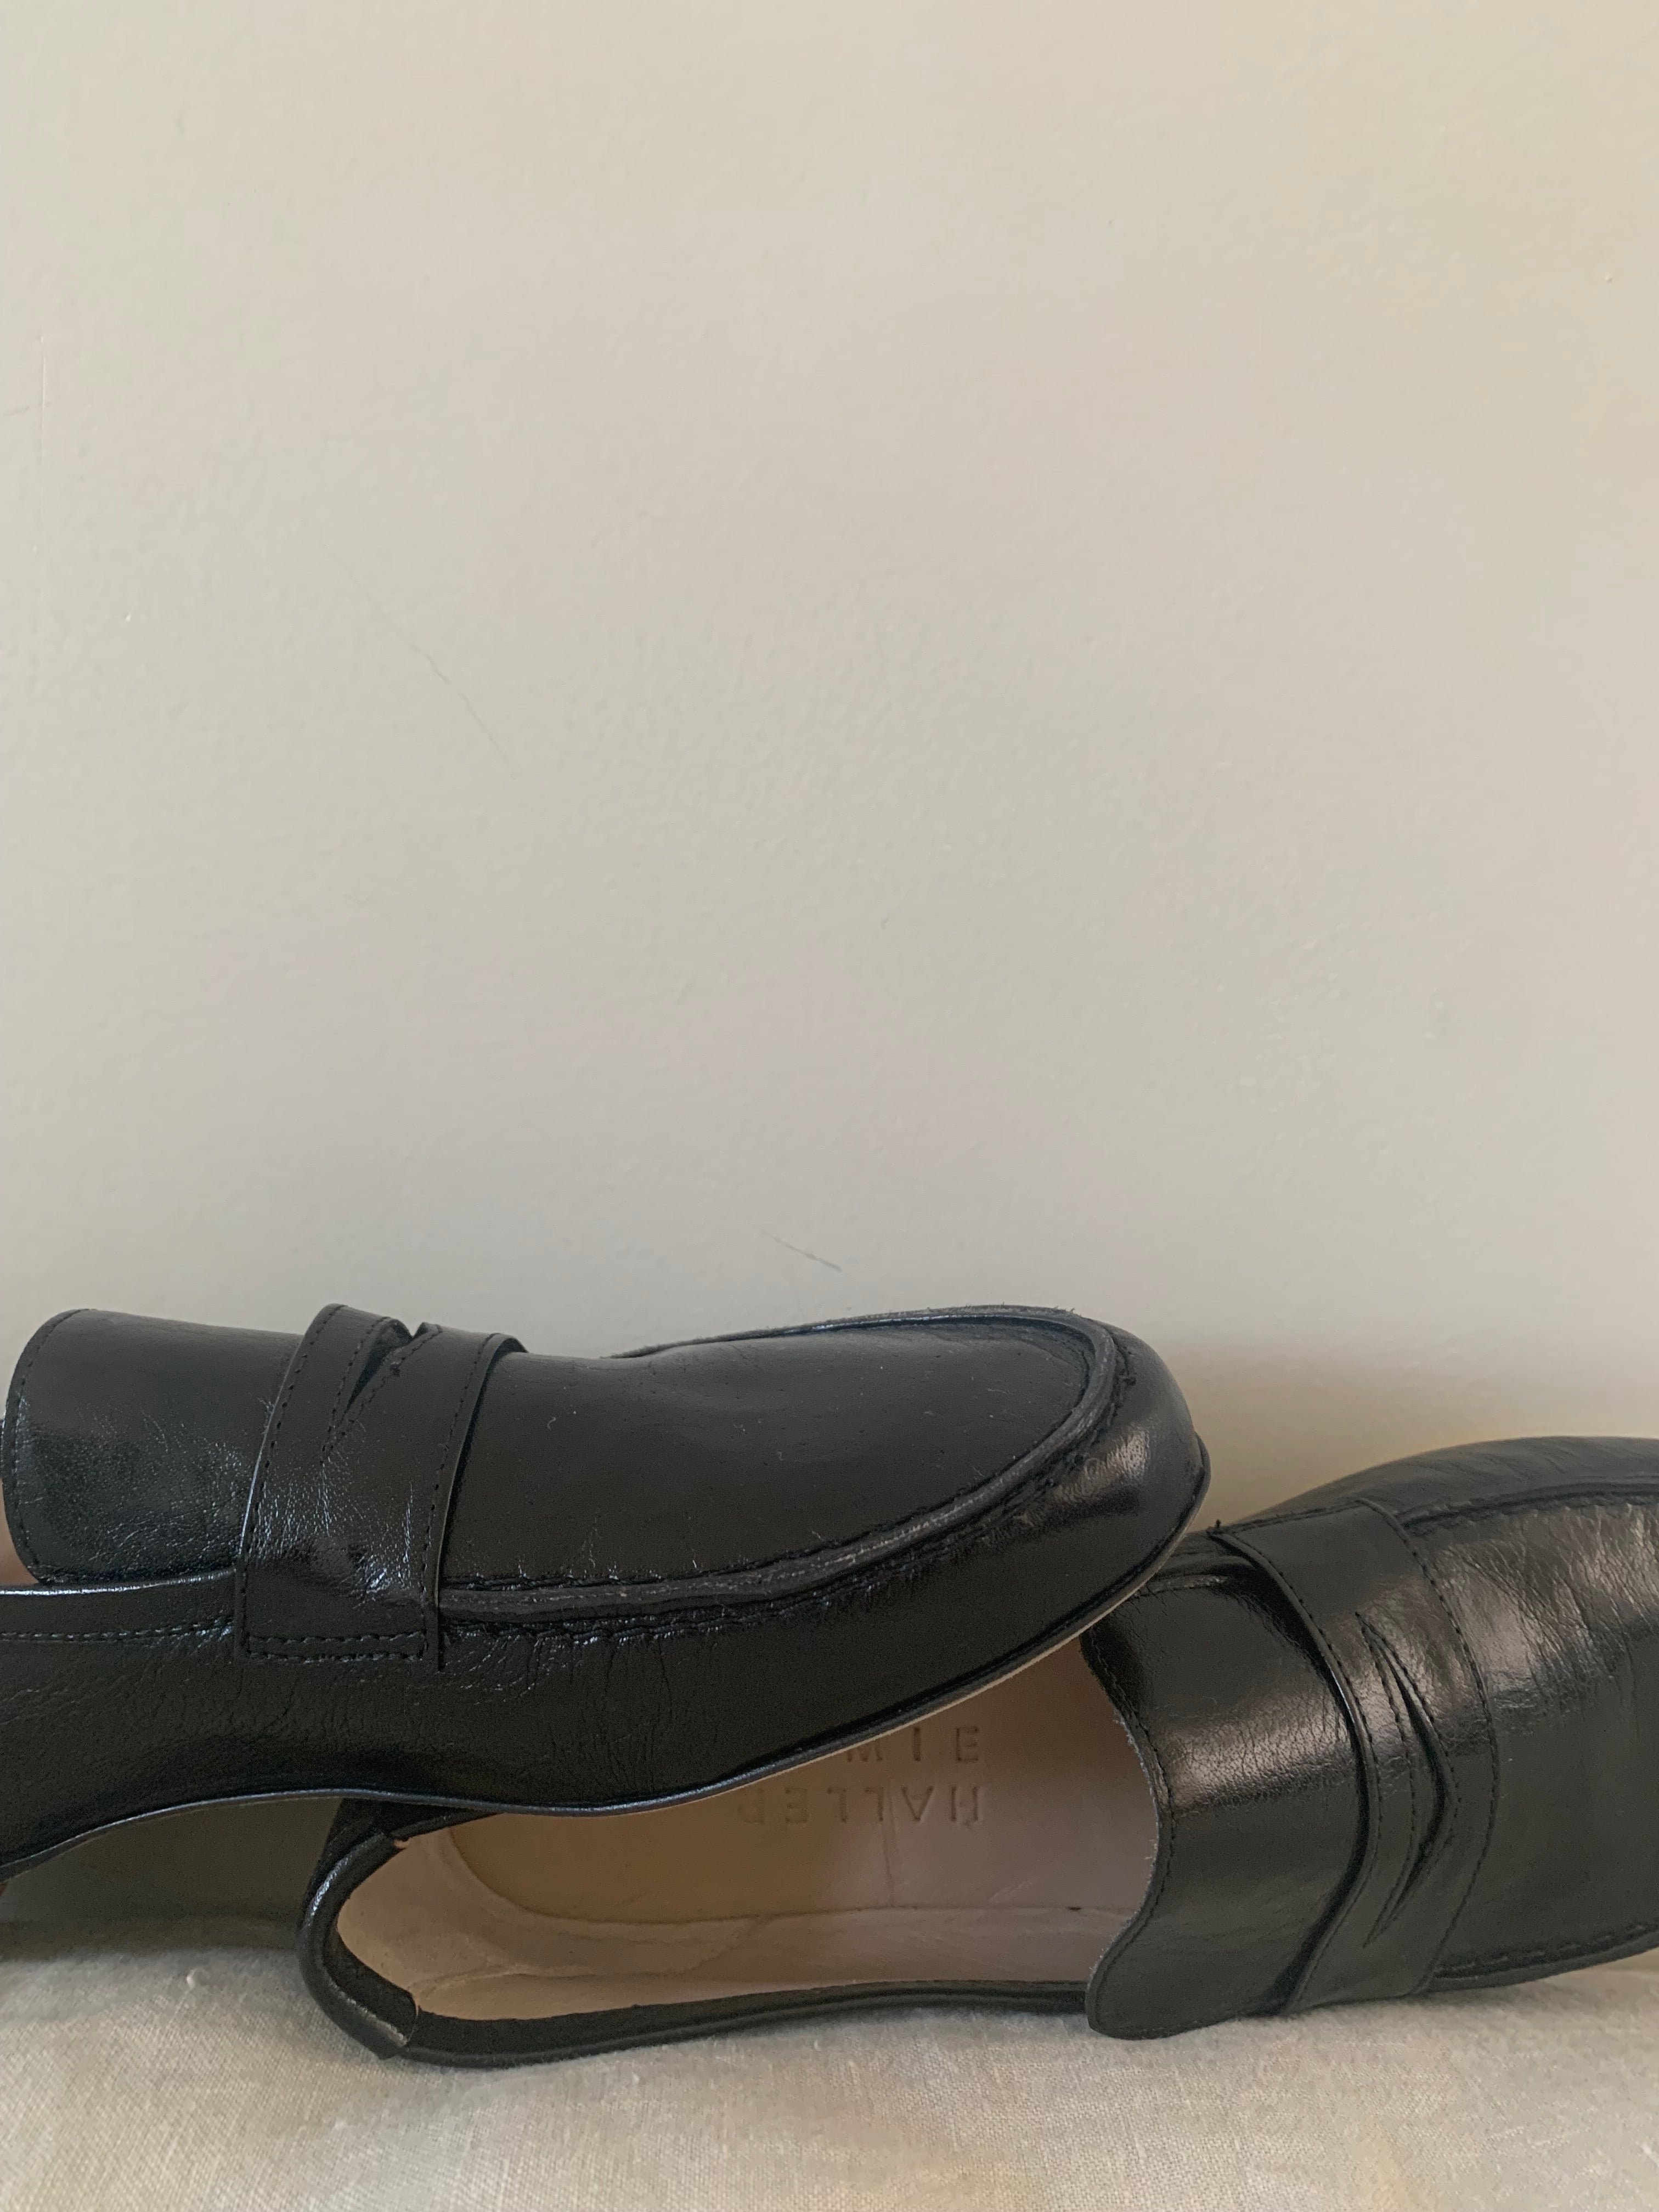 Black Loafers Laying on the Ground